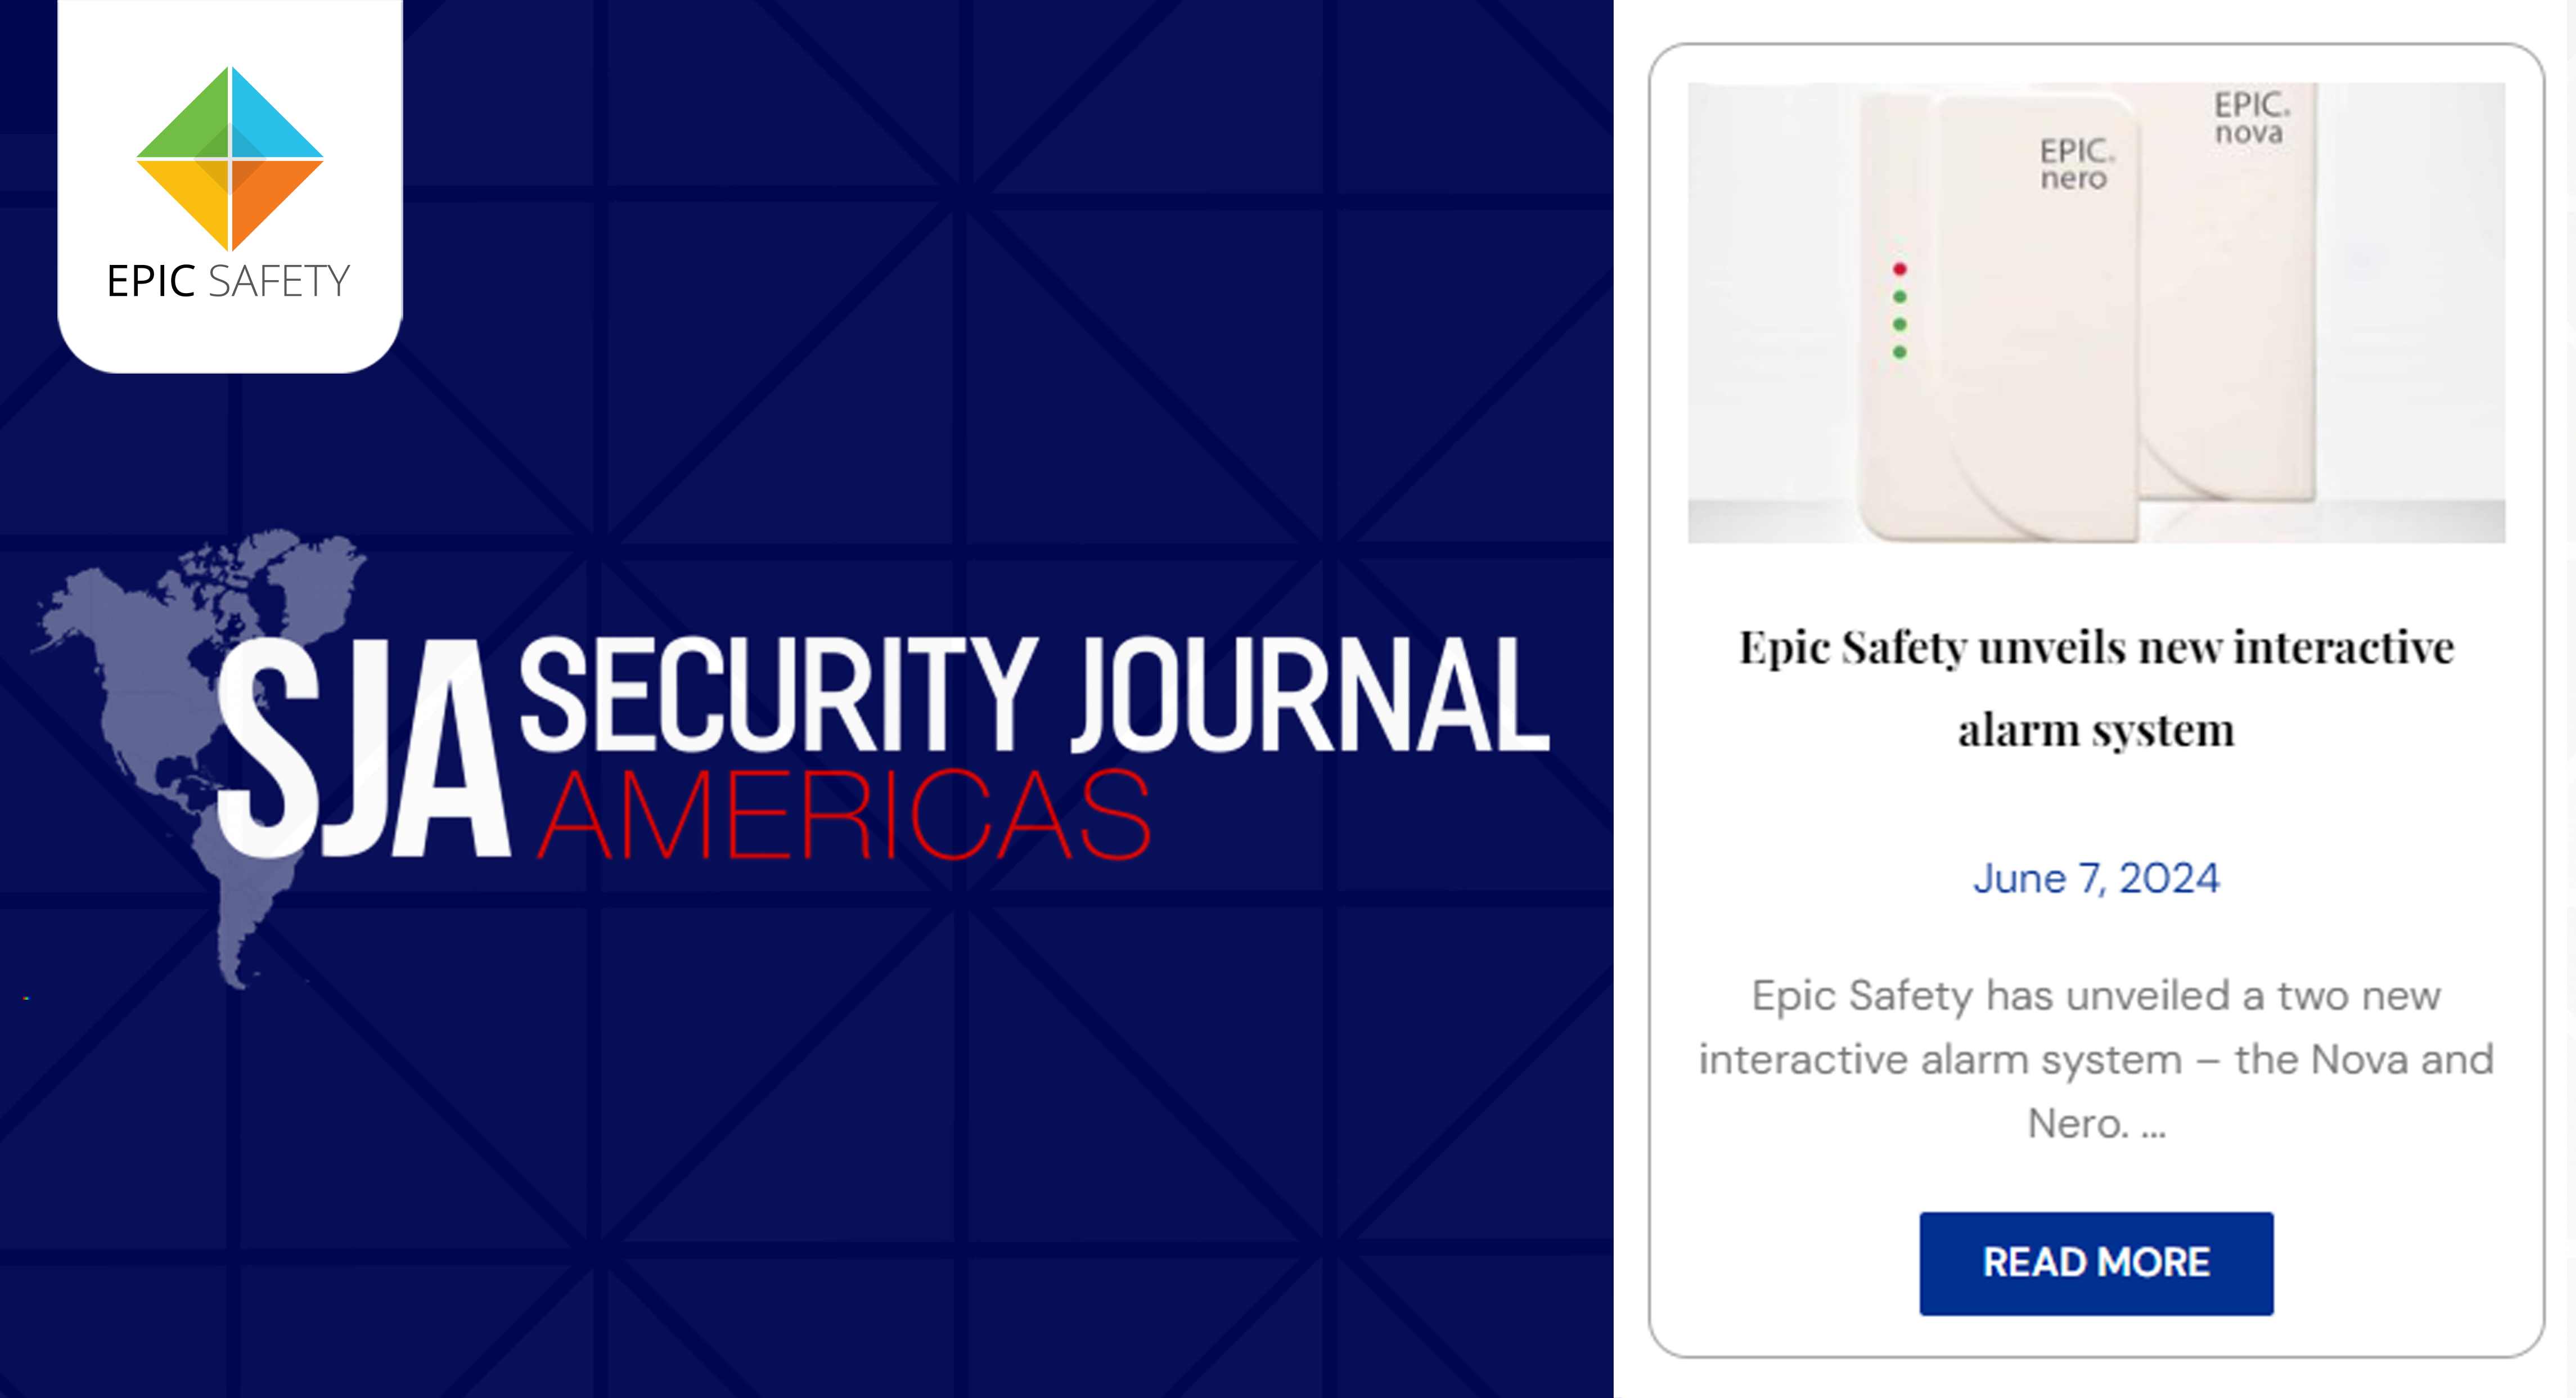 Epic Safety Products Featured in Security Journal Americas